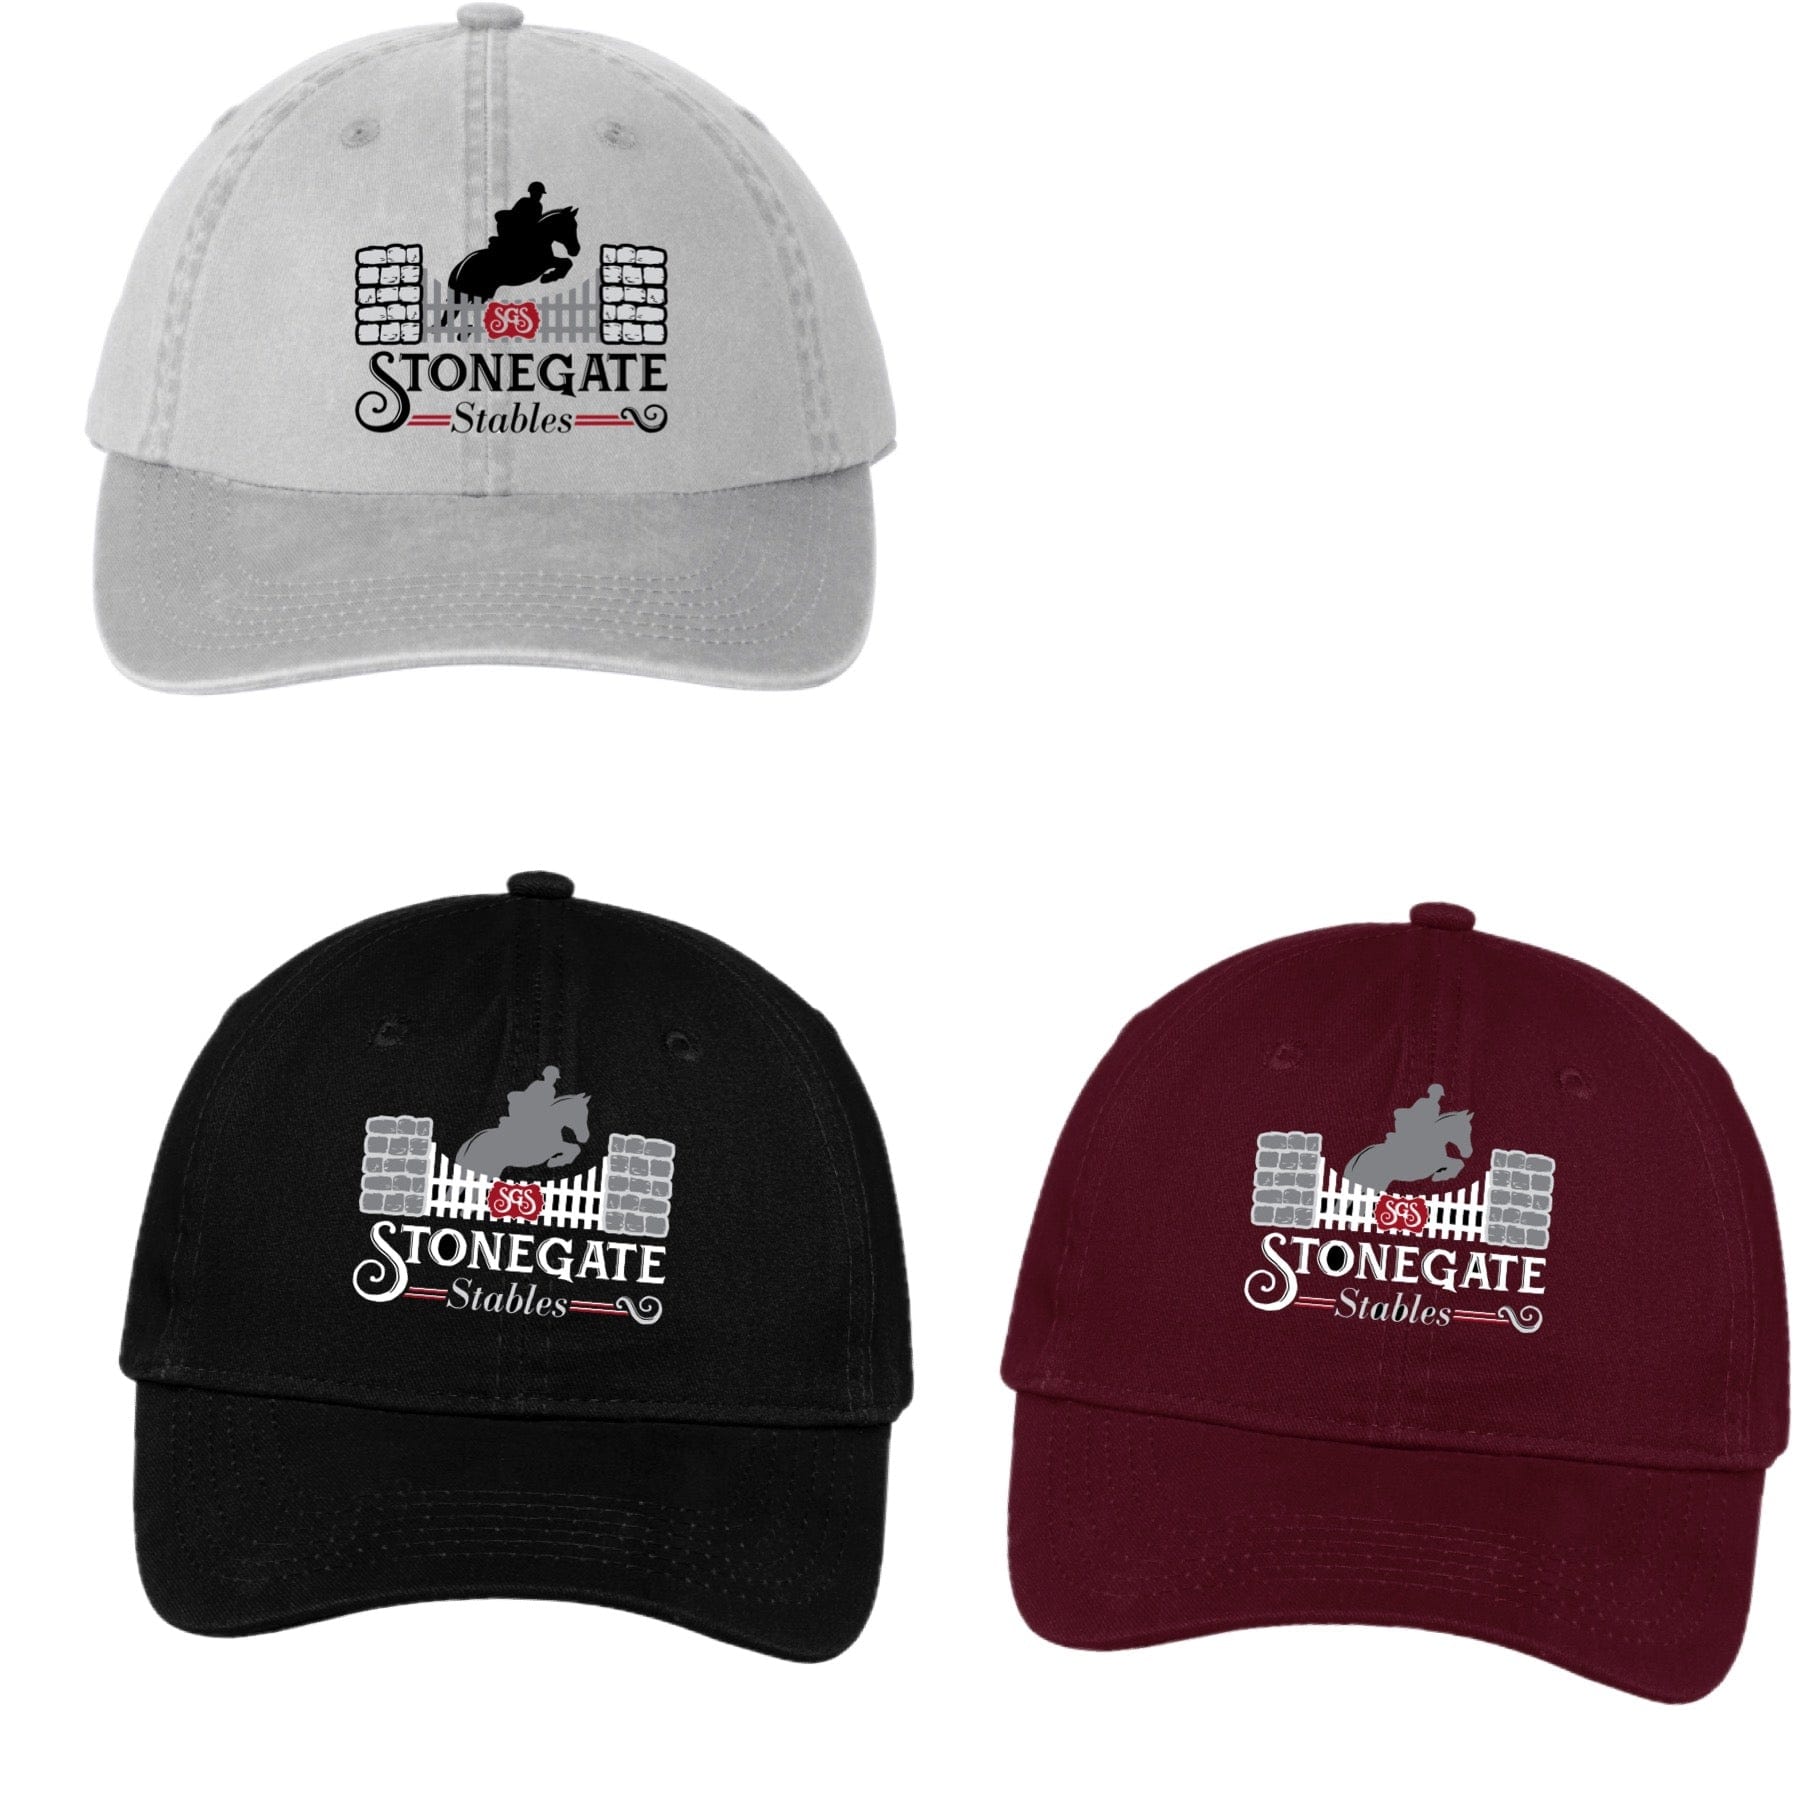 Equestrian Team Apparel Stonegate Stables Baseball Cap equestrian team apparel online tack store mobile tack store custom farm apparel custom show stable clothing equestrian lifestyle horse show clothing riding clothes horses equestrian tack store